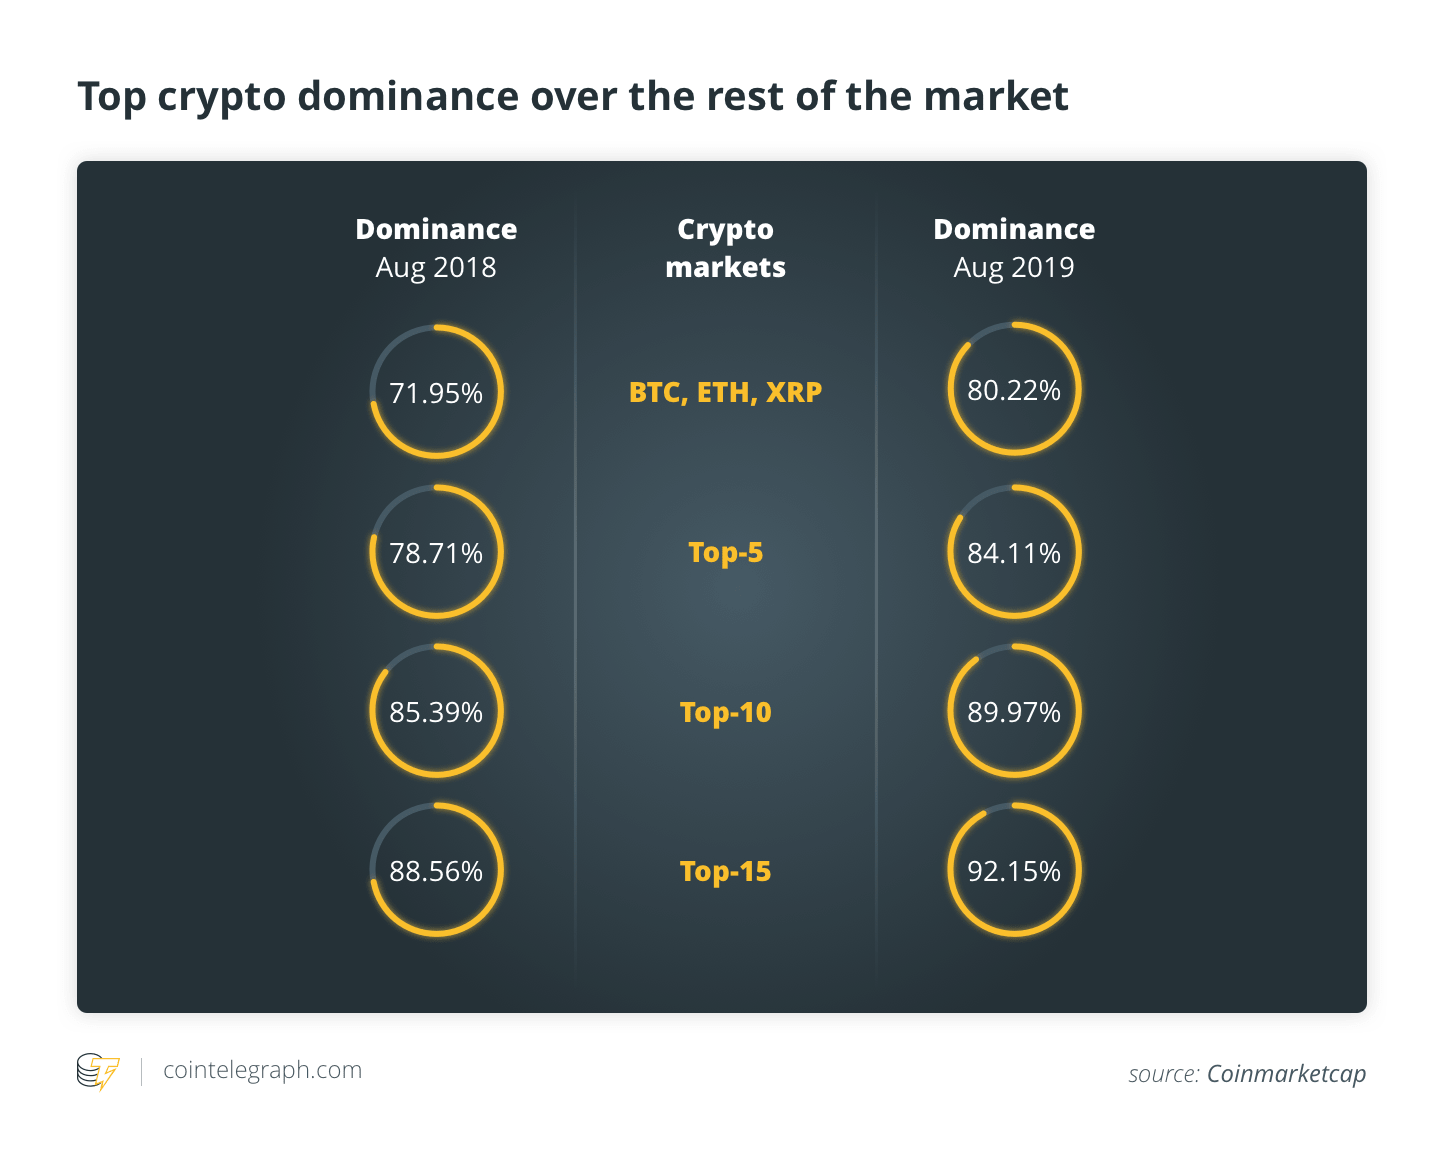 Top crypto dominance over the rest of the market